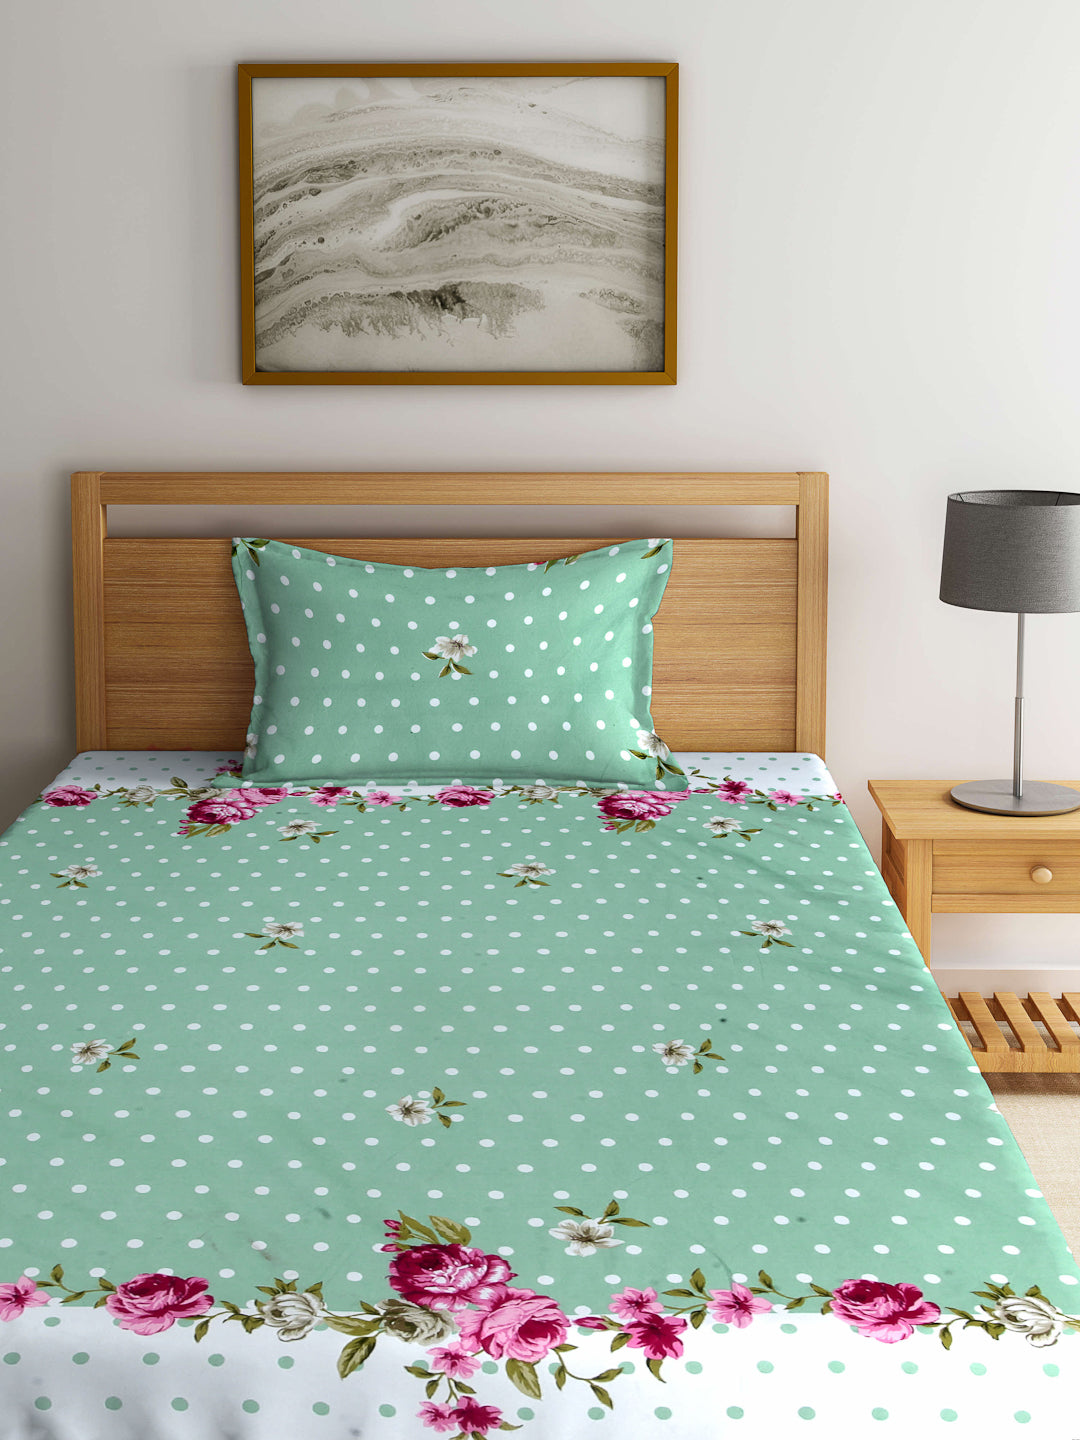 Arrabi Green Floral TC Cotton Blend Single Size Fitted Bedsheet with 1 Pillow Cover (220 X 150 cm)